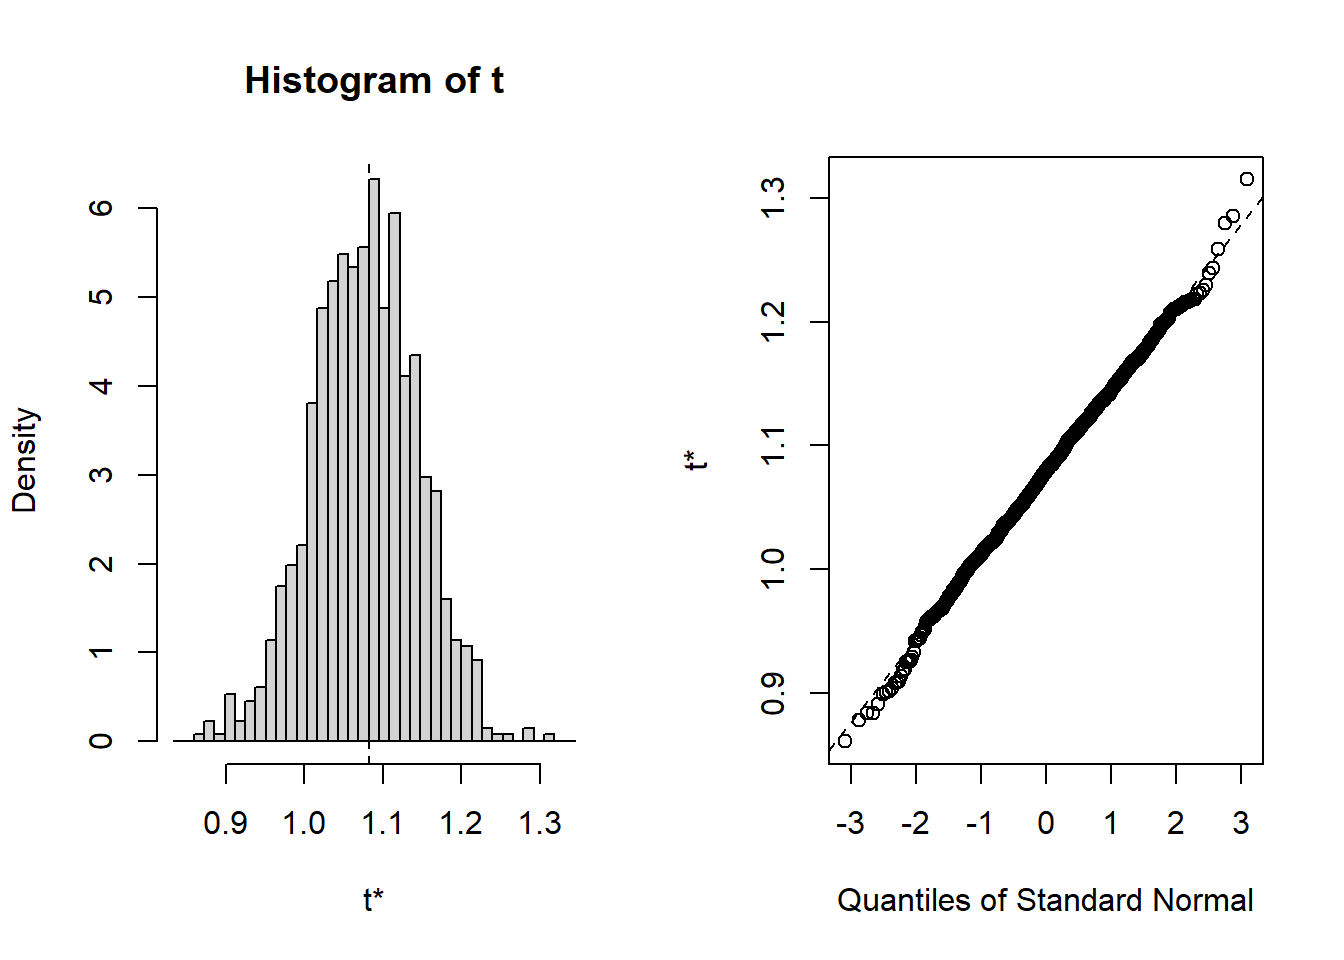 Distribution of Bootstrap Replicates. The left-hand panel is a histogram of replicates. The right-hand panel is a quantile-quantile plot, comparing the bootstrap distribution to the standard normal distribution.